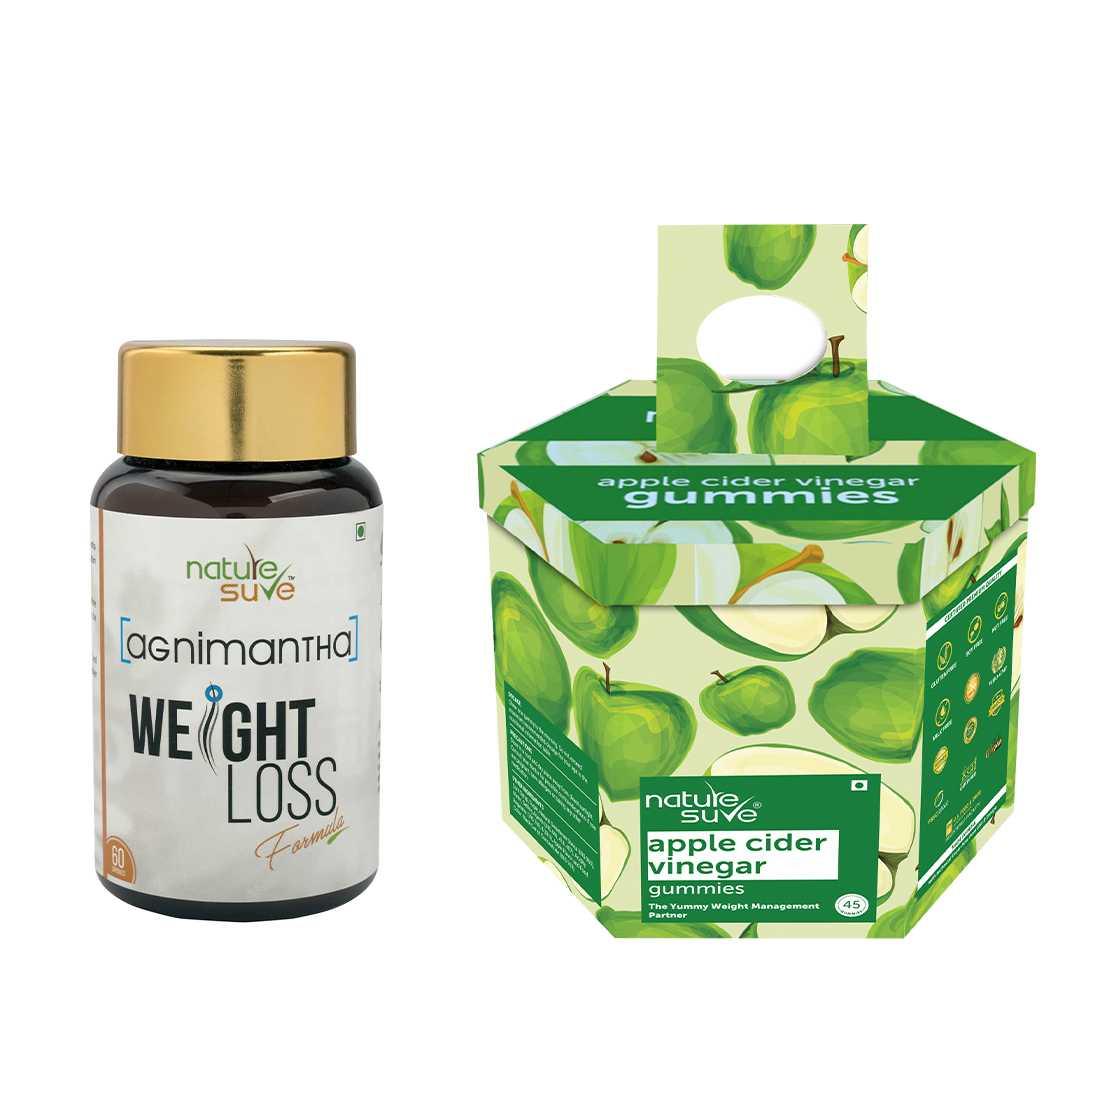 Nature Sure Combo - Agnimantha Weight Loss 60 Capsules and 45 Apple Cider Vinegar Gummies  - Official Brand Store